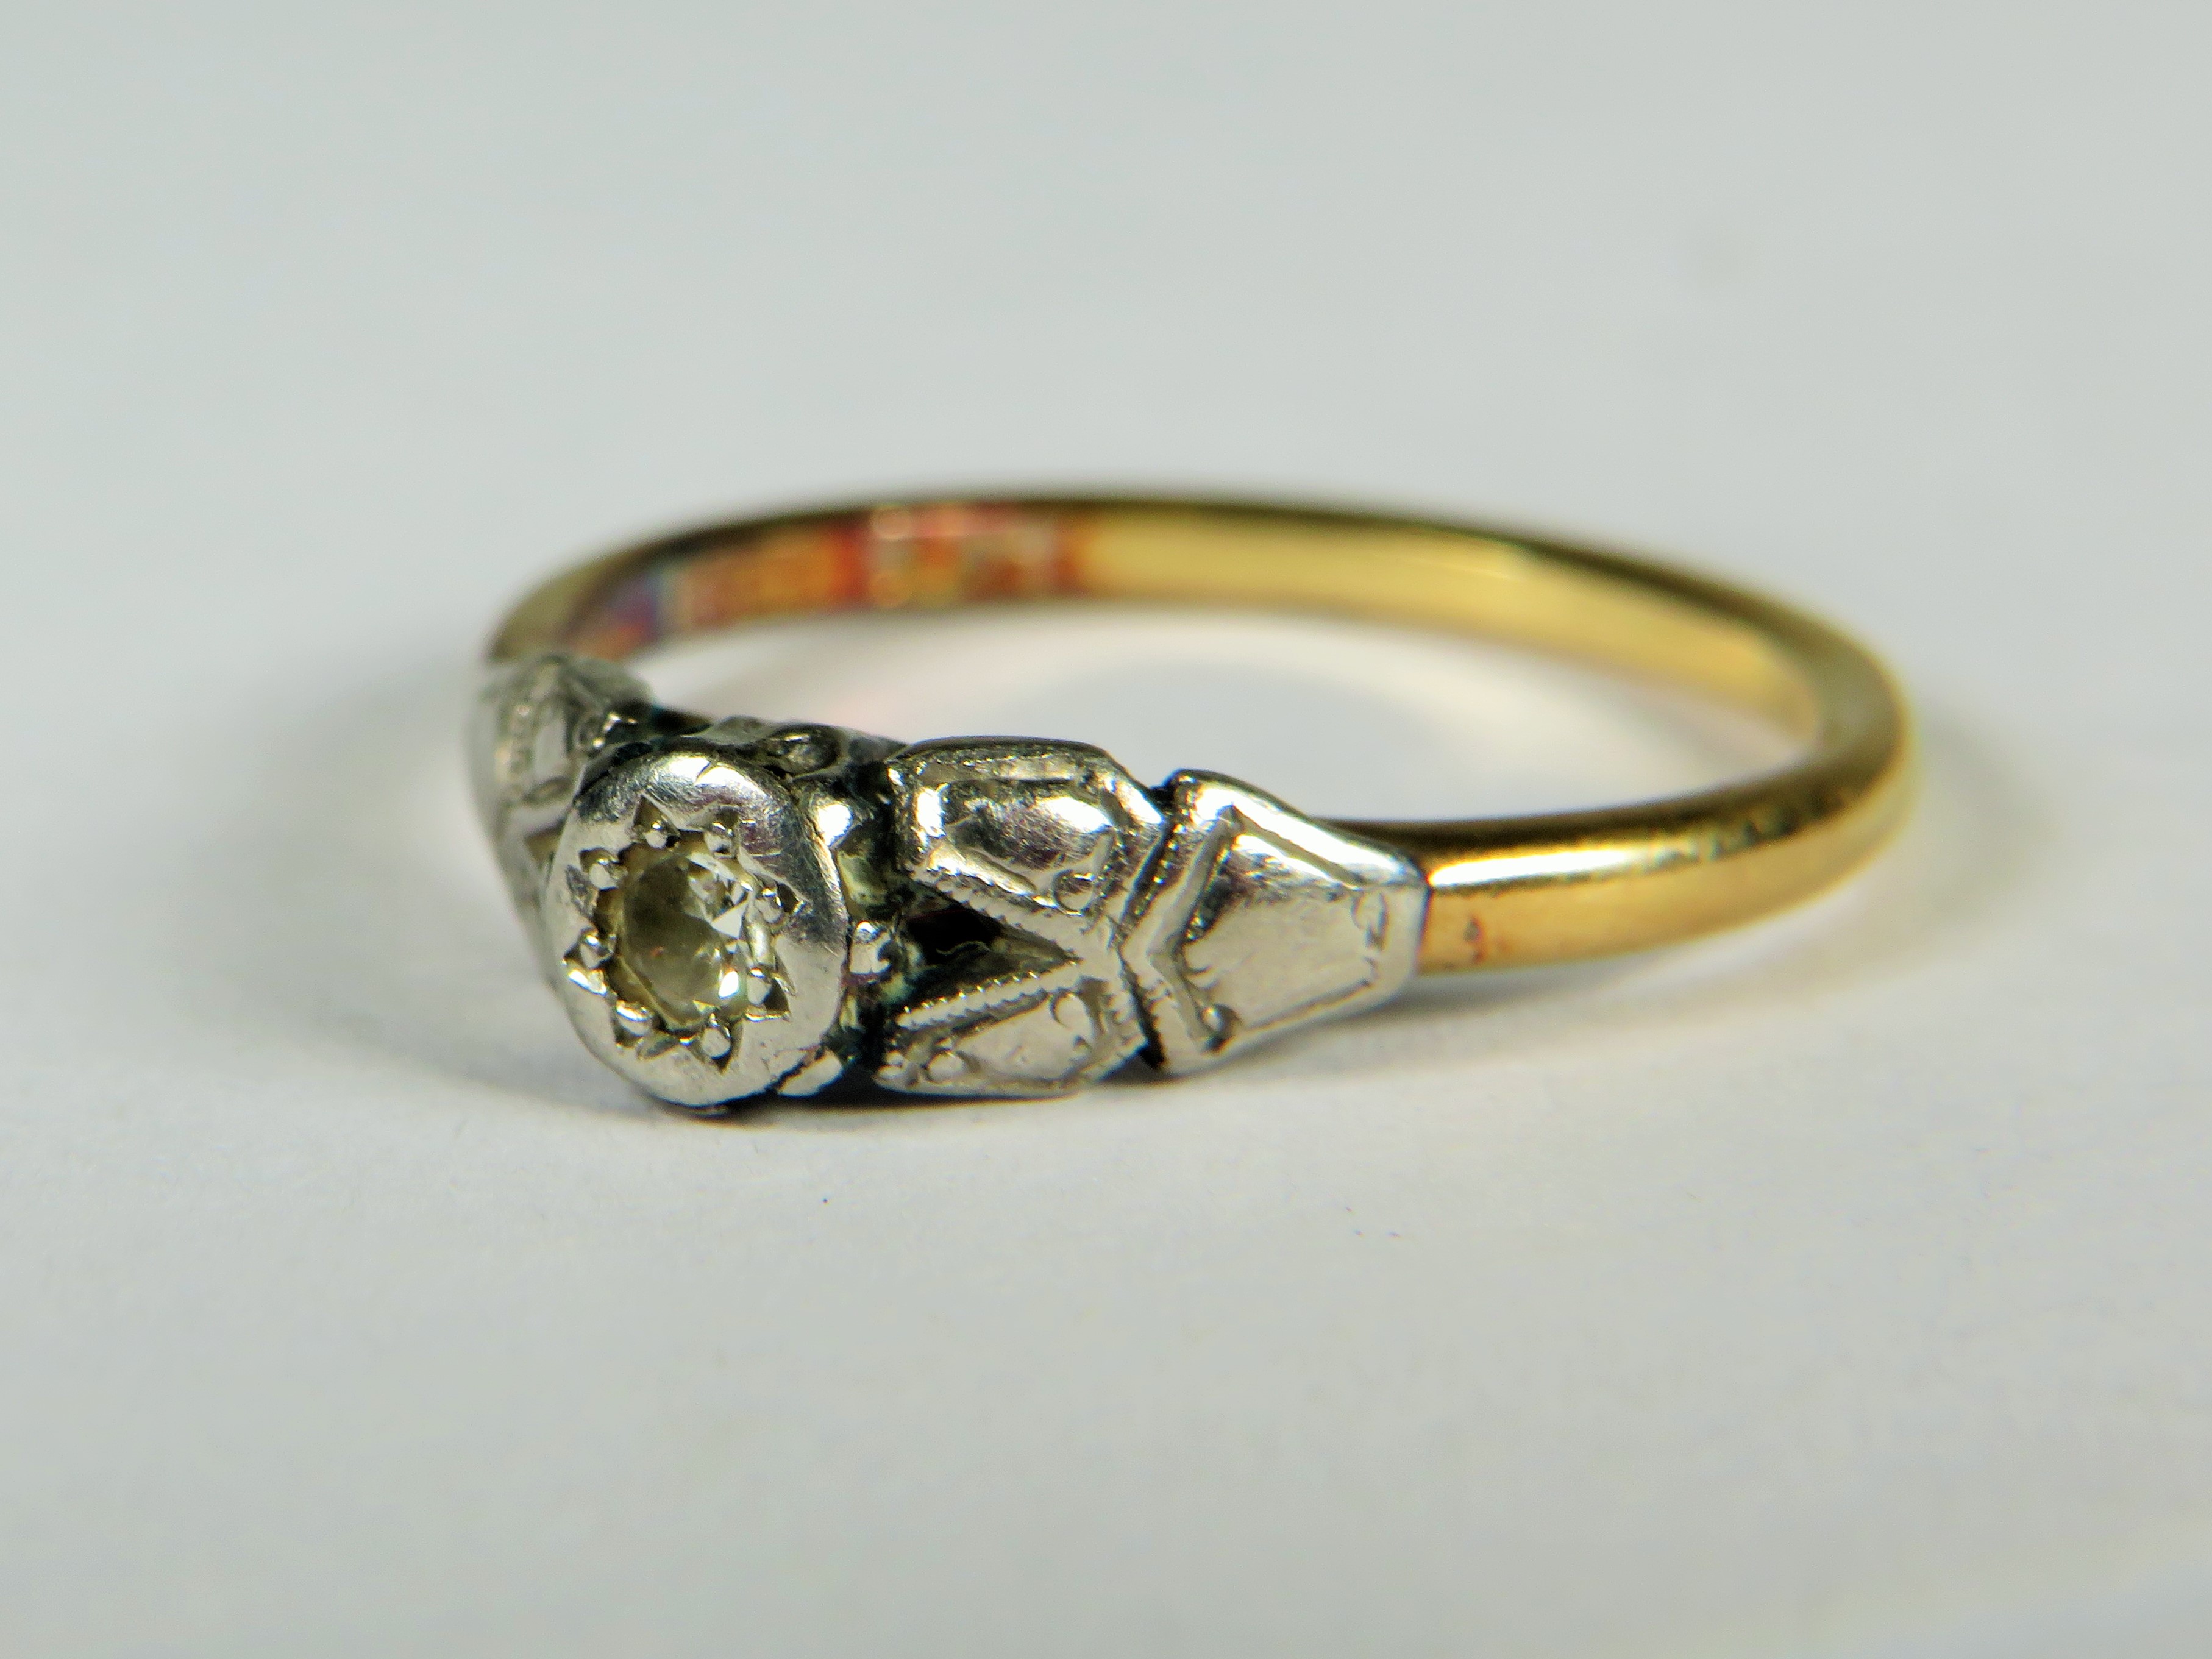 18ct Yellow Gold Ring set with an Illusion mounted Diamond.(2mm)   Finger size 'N'2.0g - Image 2 of 3